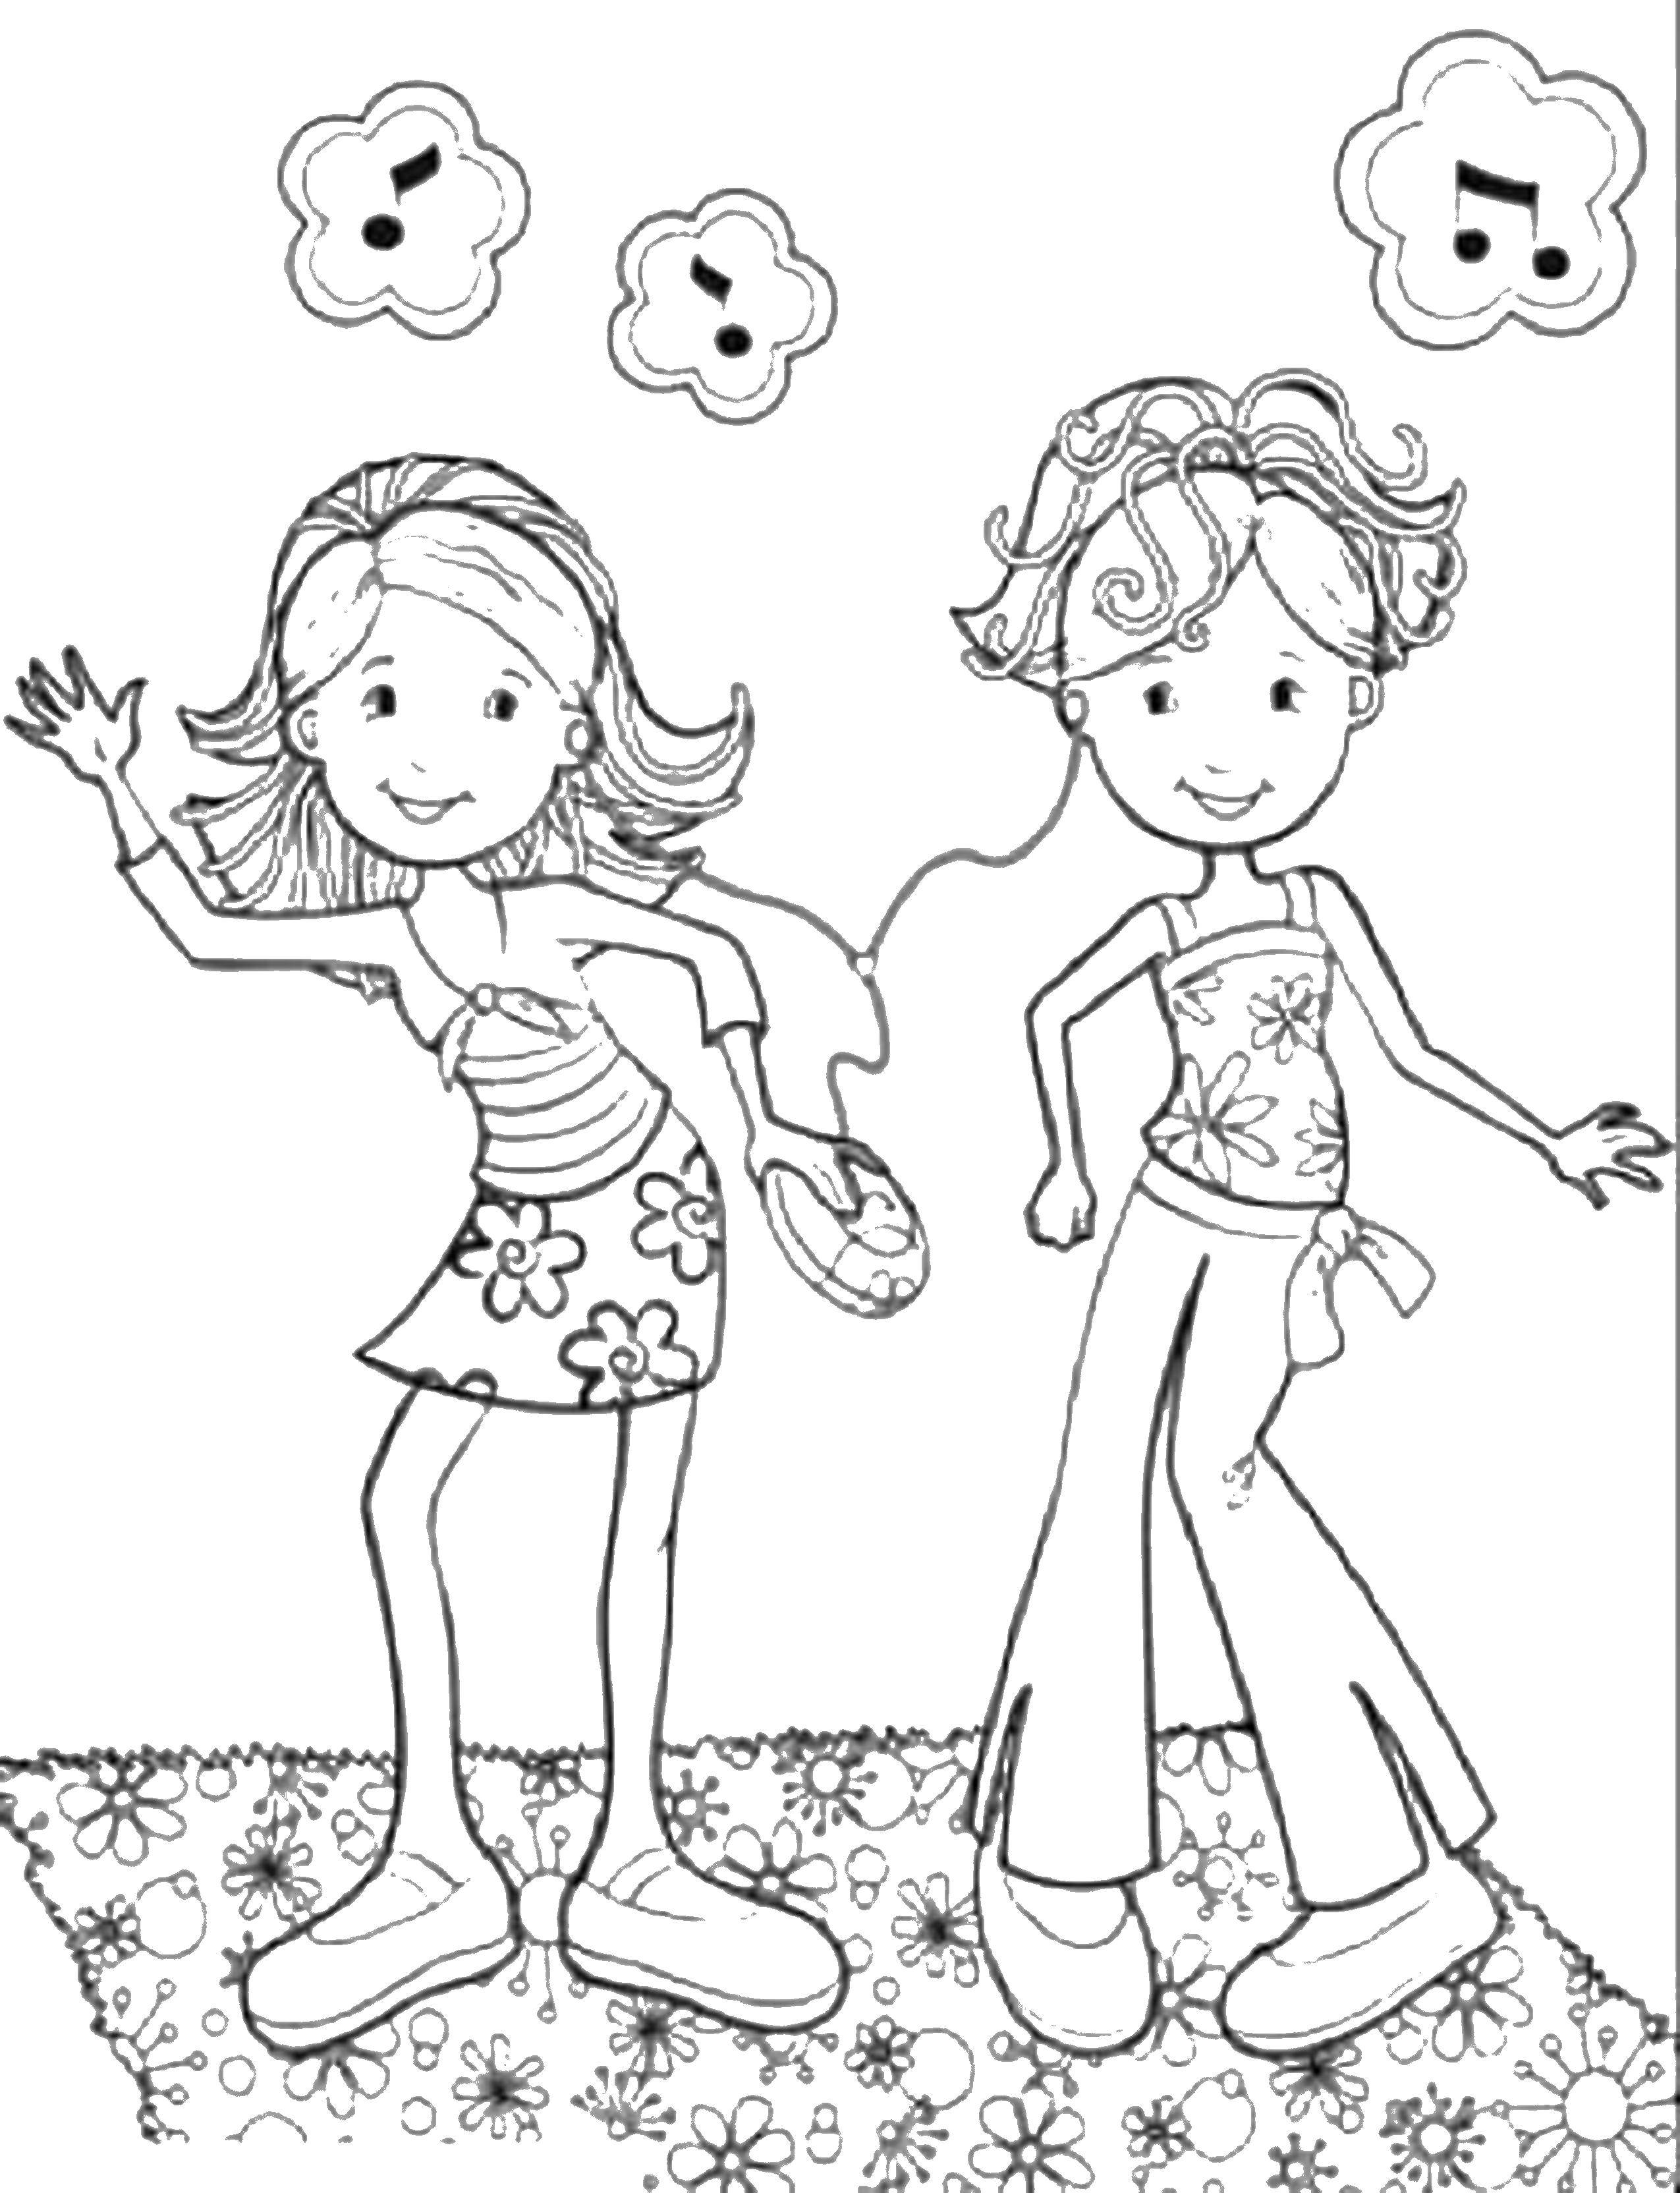 Coloring Girl listening to music. Category coloring pages for girls. Tags:  girl, music.